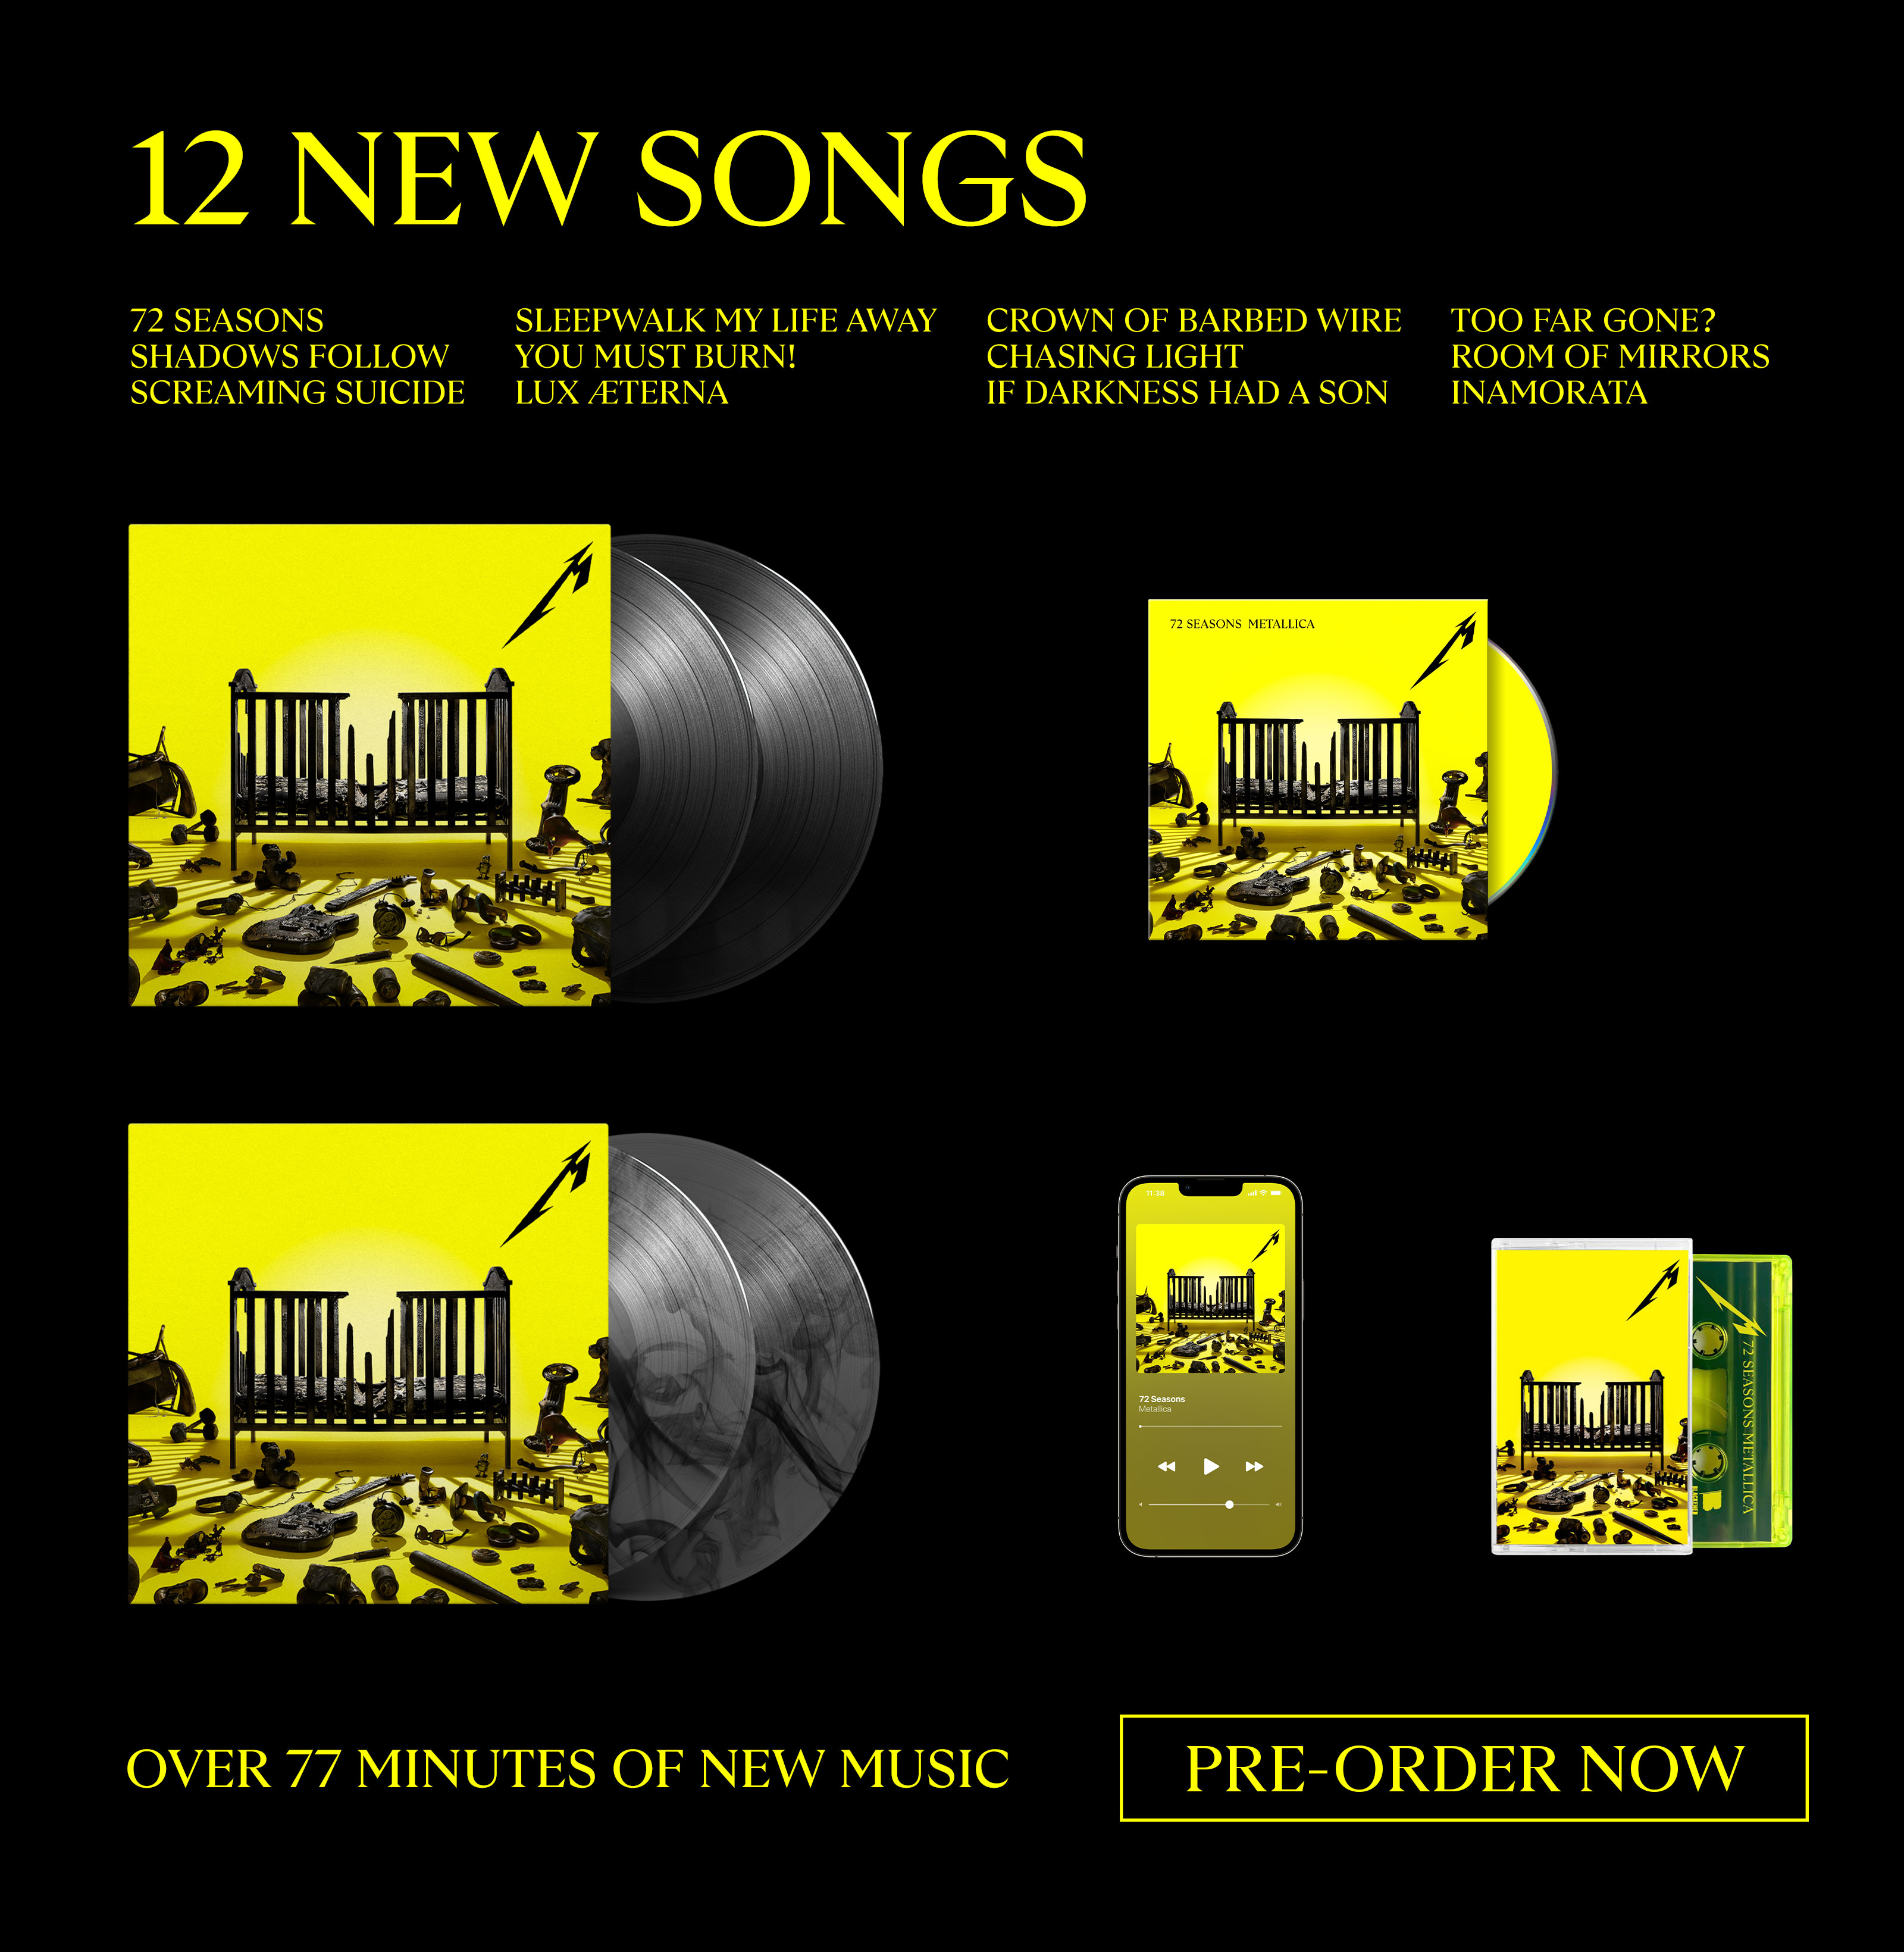 Black background. "Music" written sidewise in yellow. Vinyl discs shown coming out of their album art cover. Vinyls discs vary in color: yellow, smoky gray, and black. "Preorder Now" button.